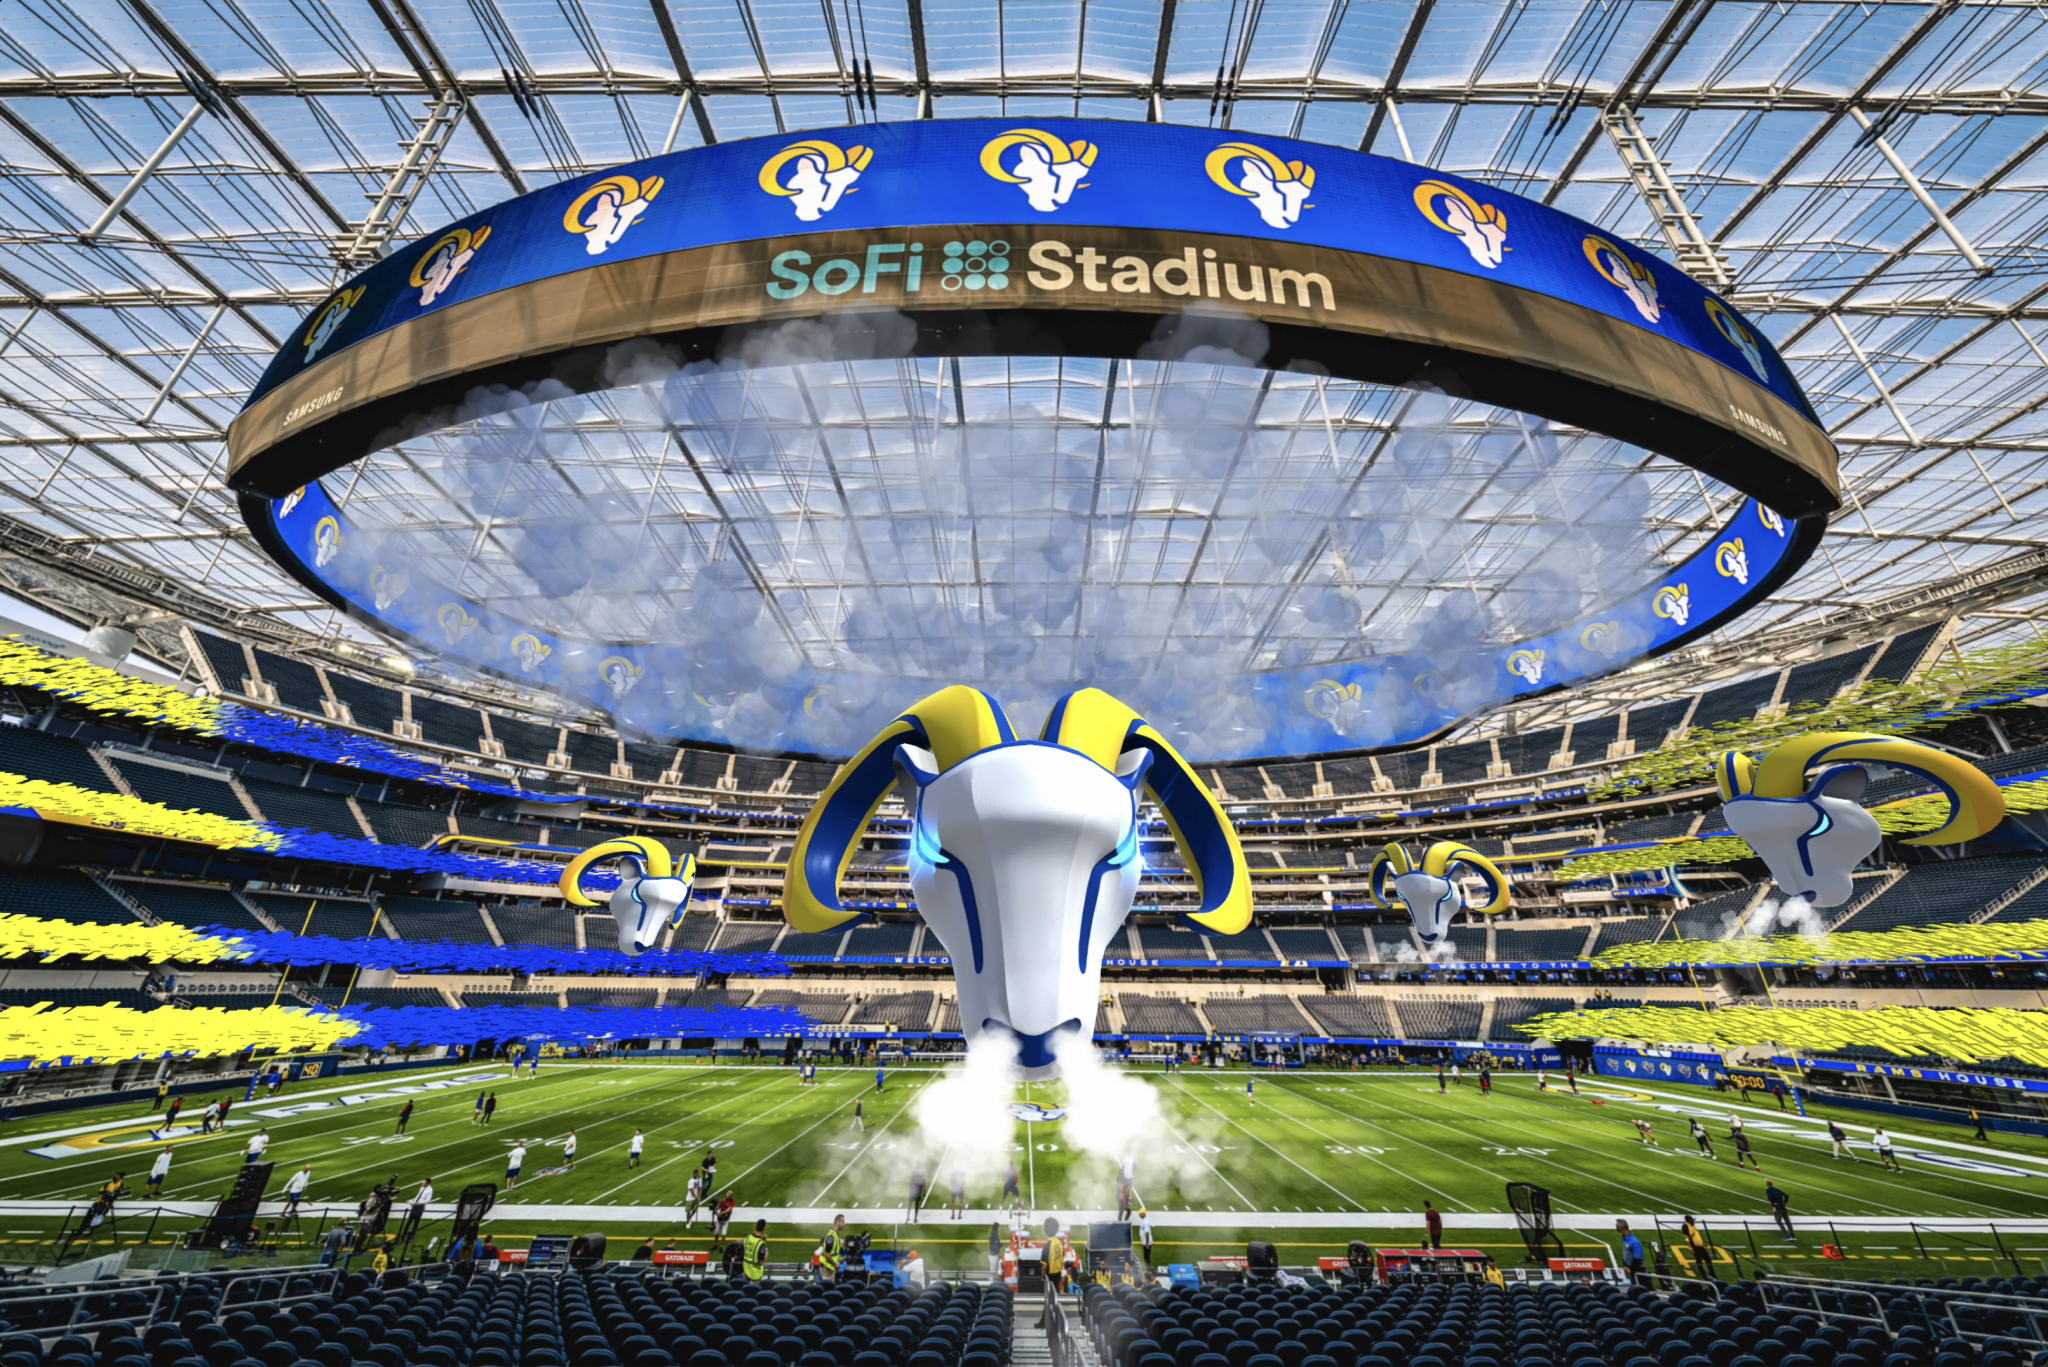 SoFi Stadium, venue for the Opening and Closing Ceremonies of Los Angeles 2028, has introduced new augmented reality technology ©ARound